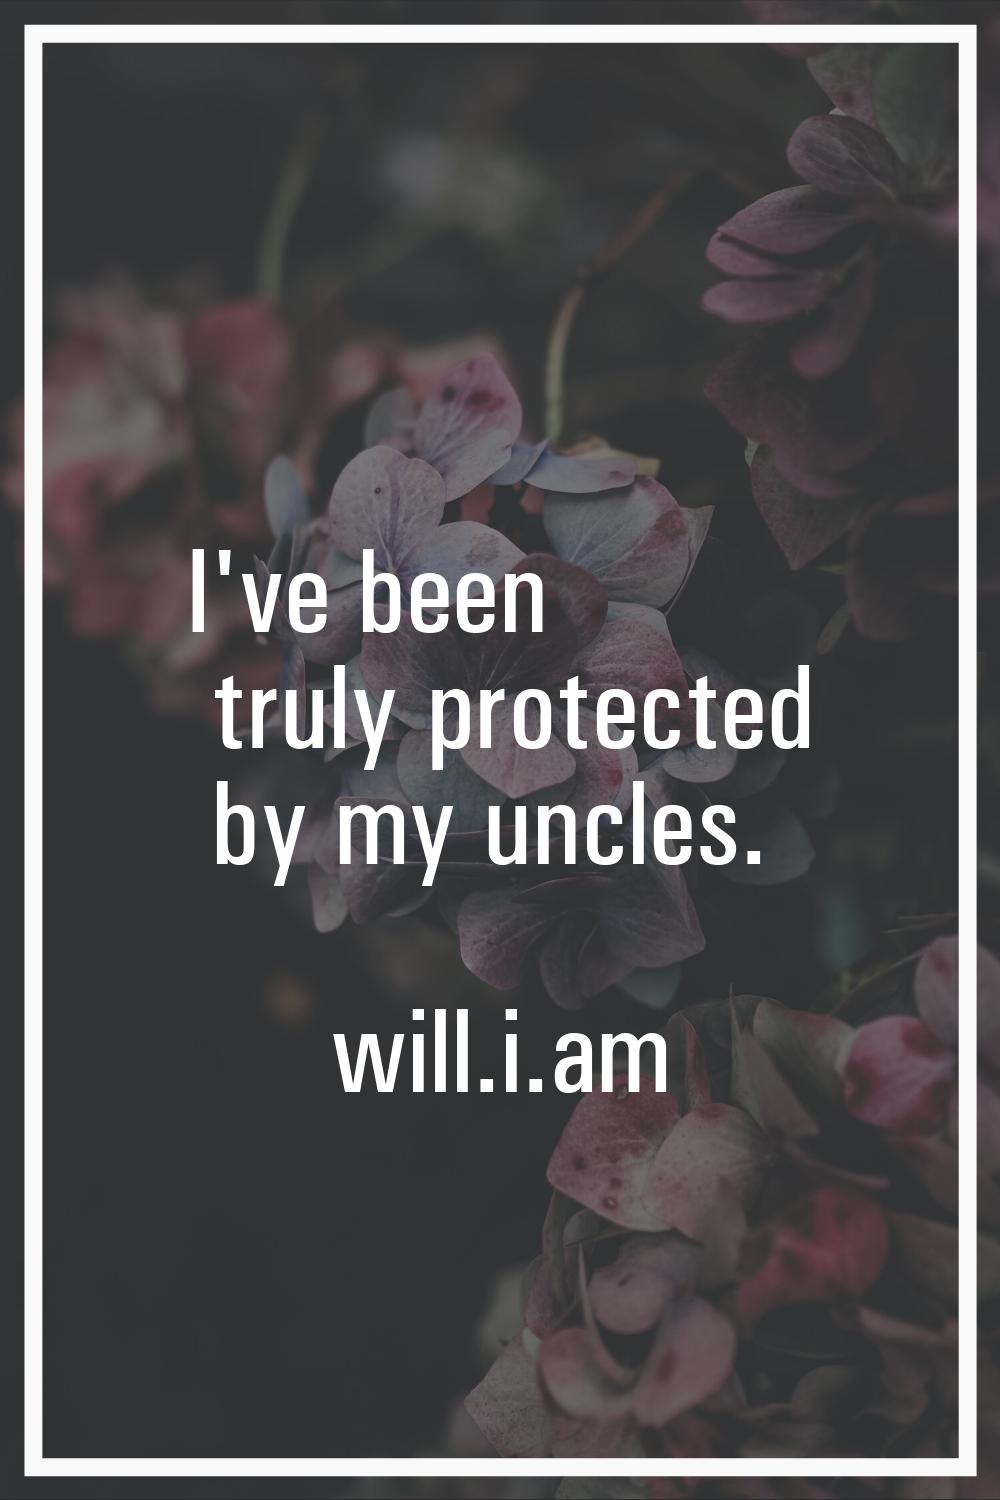 I've been truly protected by my uncles.